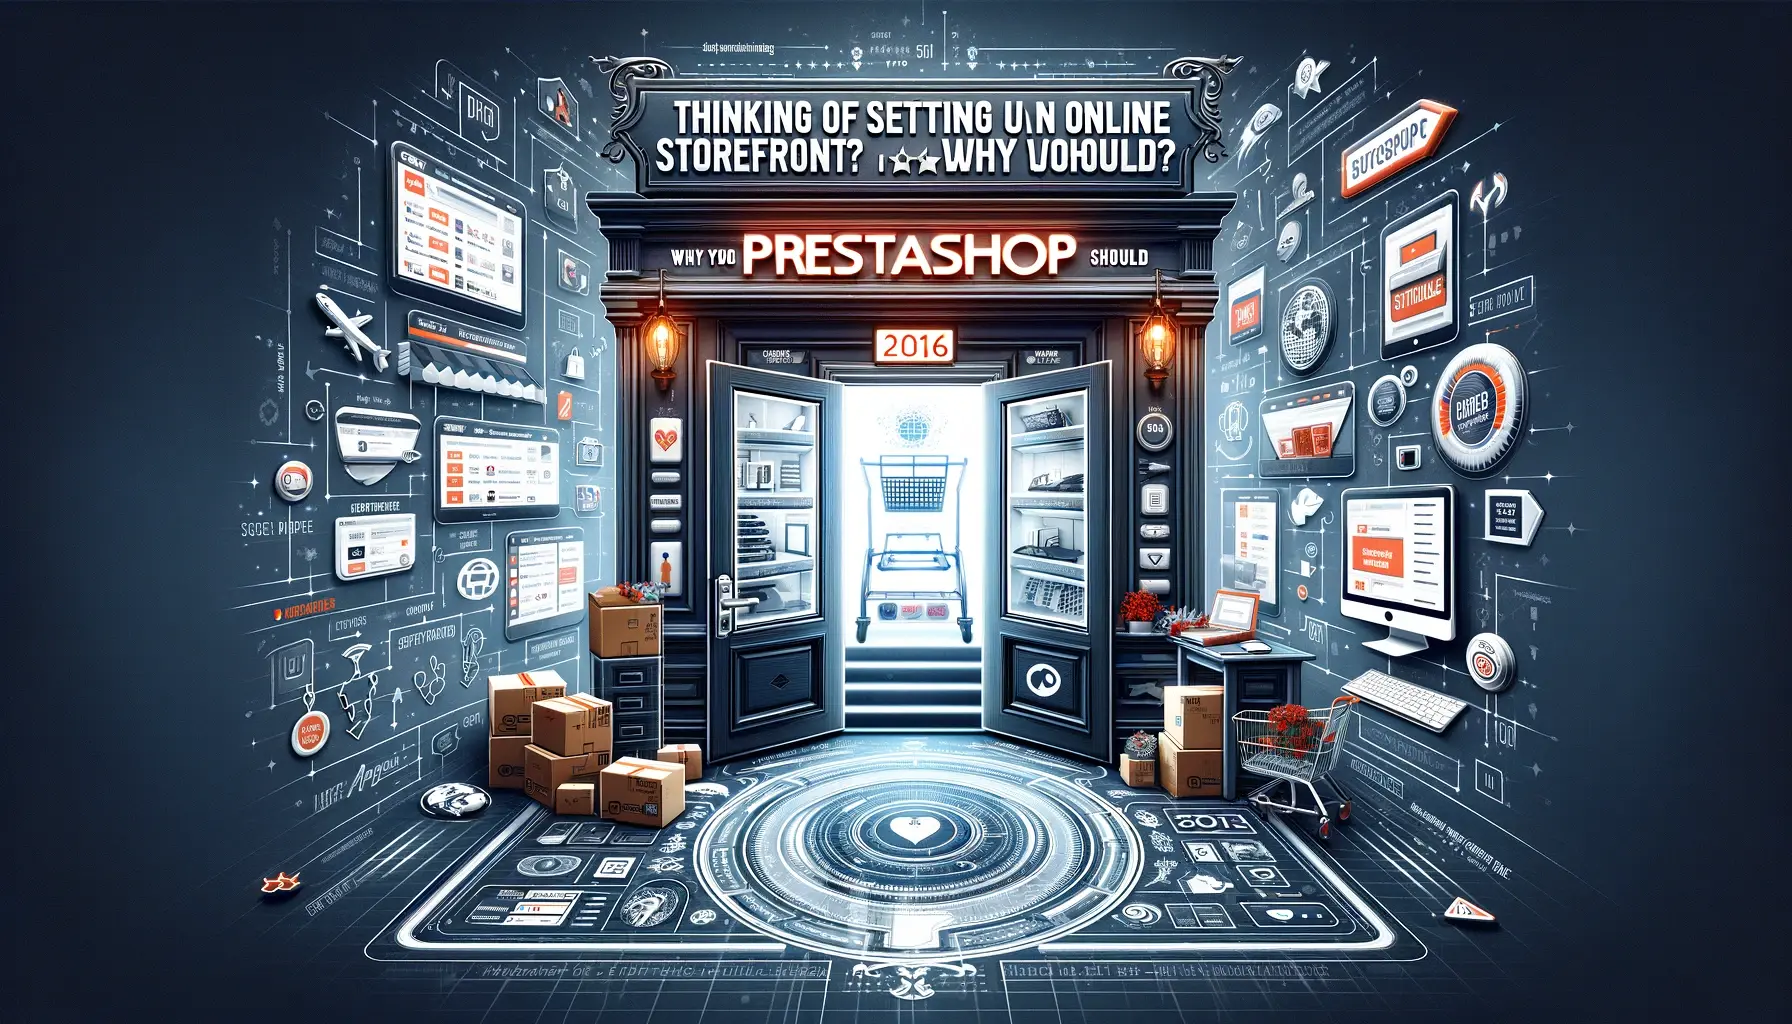 Thinking of Setting up An Online Storefront In 2016? Why You Should Consider Prestashop